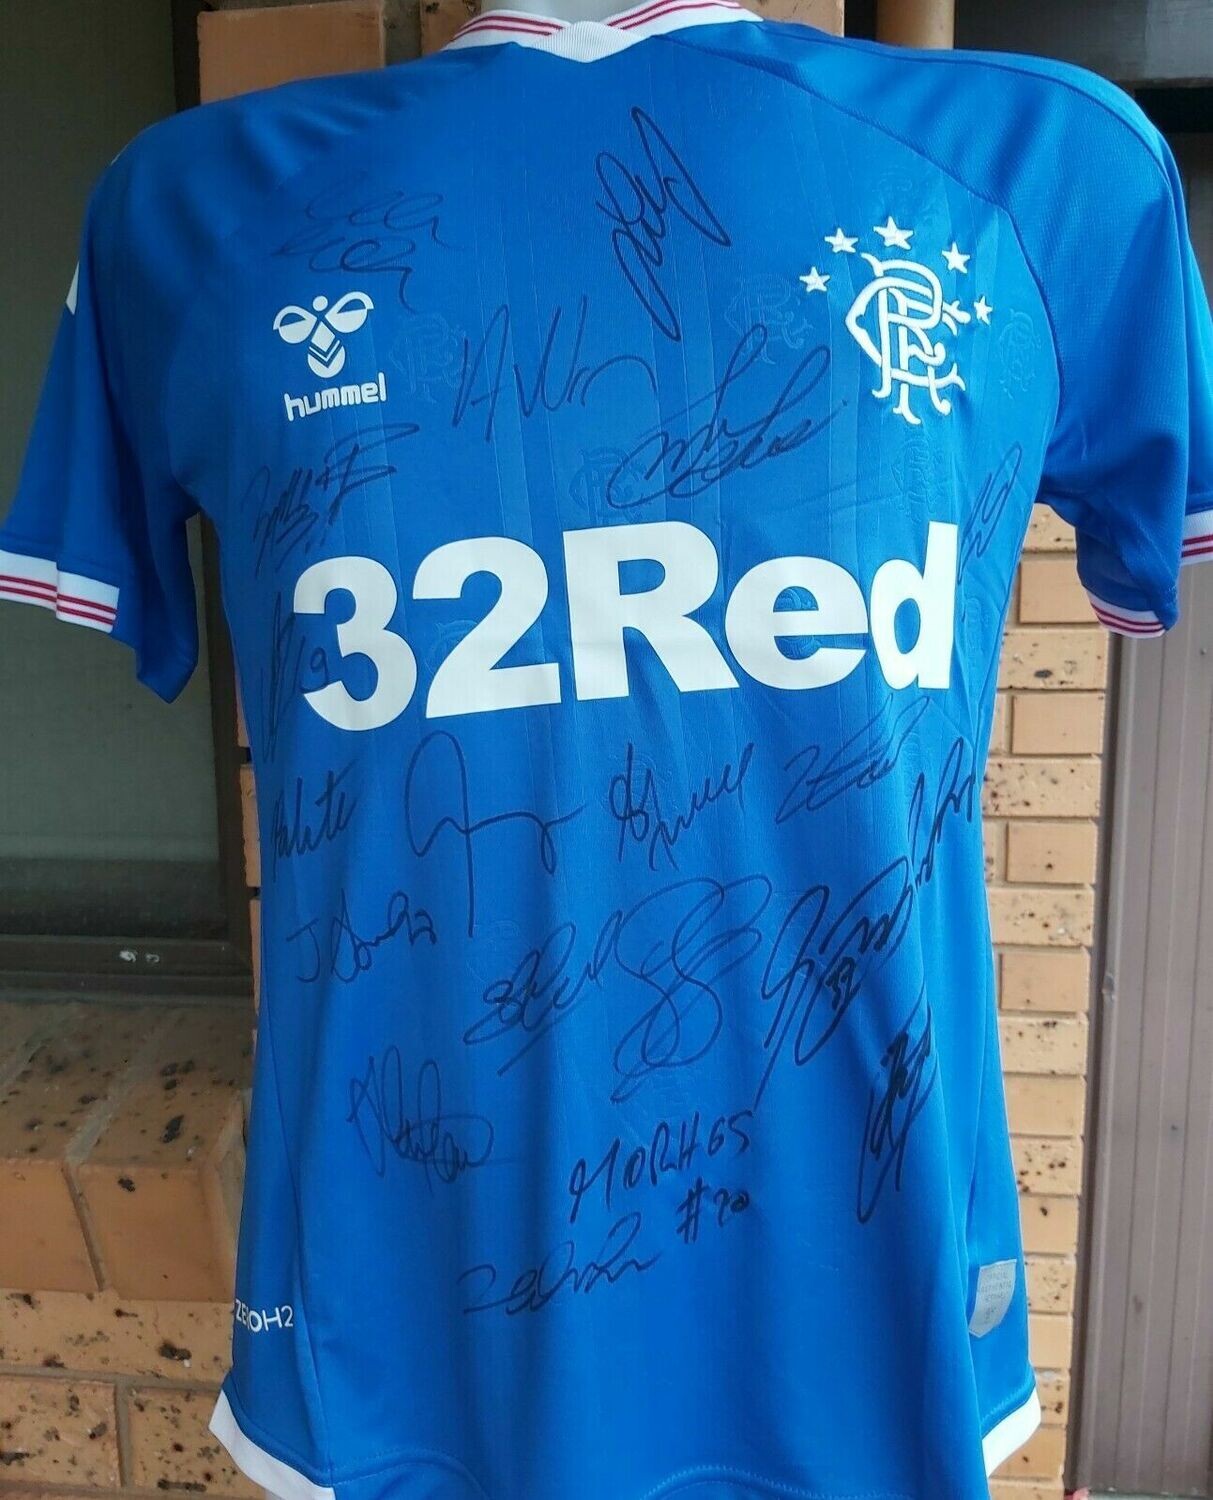 Maglia Replica GLASCOW RANGERS 2019 2020 JERSEY HOME SIGNED TEAM AUTOGRAPHS TEAM with COA certificate GLASCOW RANGERS 19 20 Signed Team